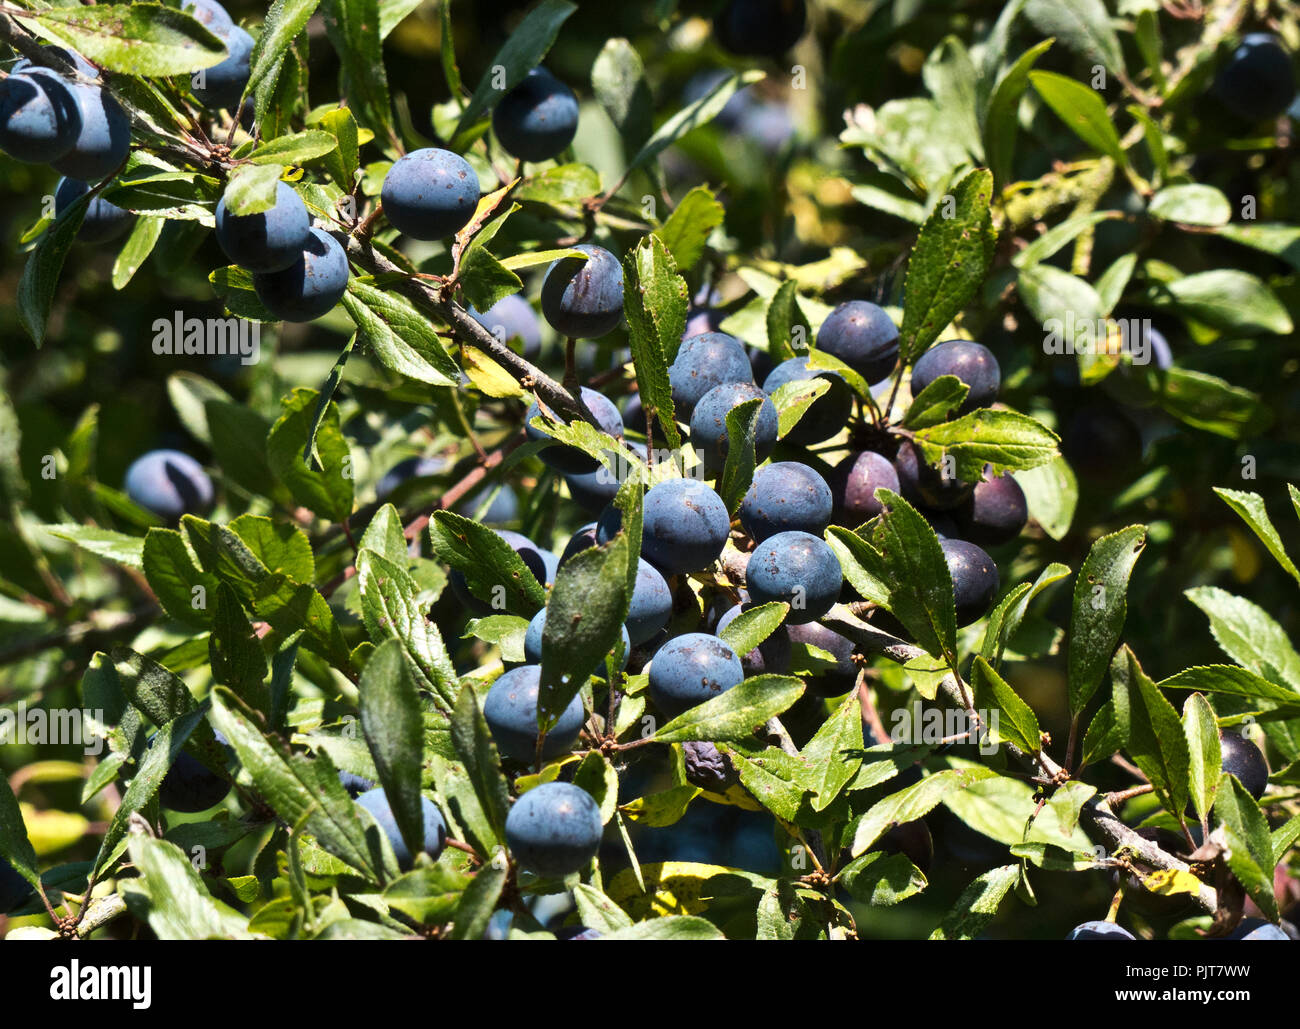 The berries of the Blackthorn are often called sloes, from the old English meaning fruit. Often planted to form impenetrable hedges the sloes are ofte Stock Photo